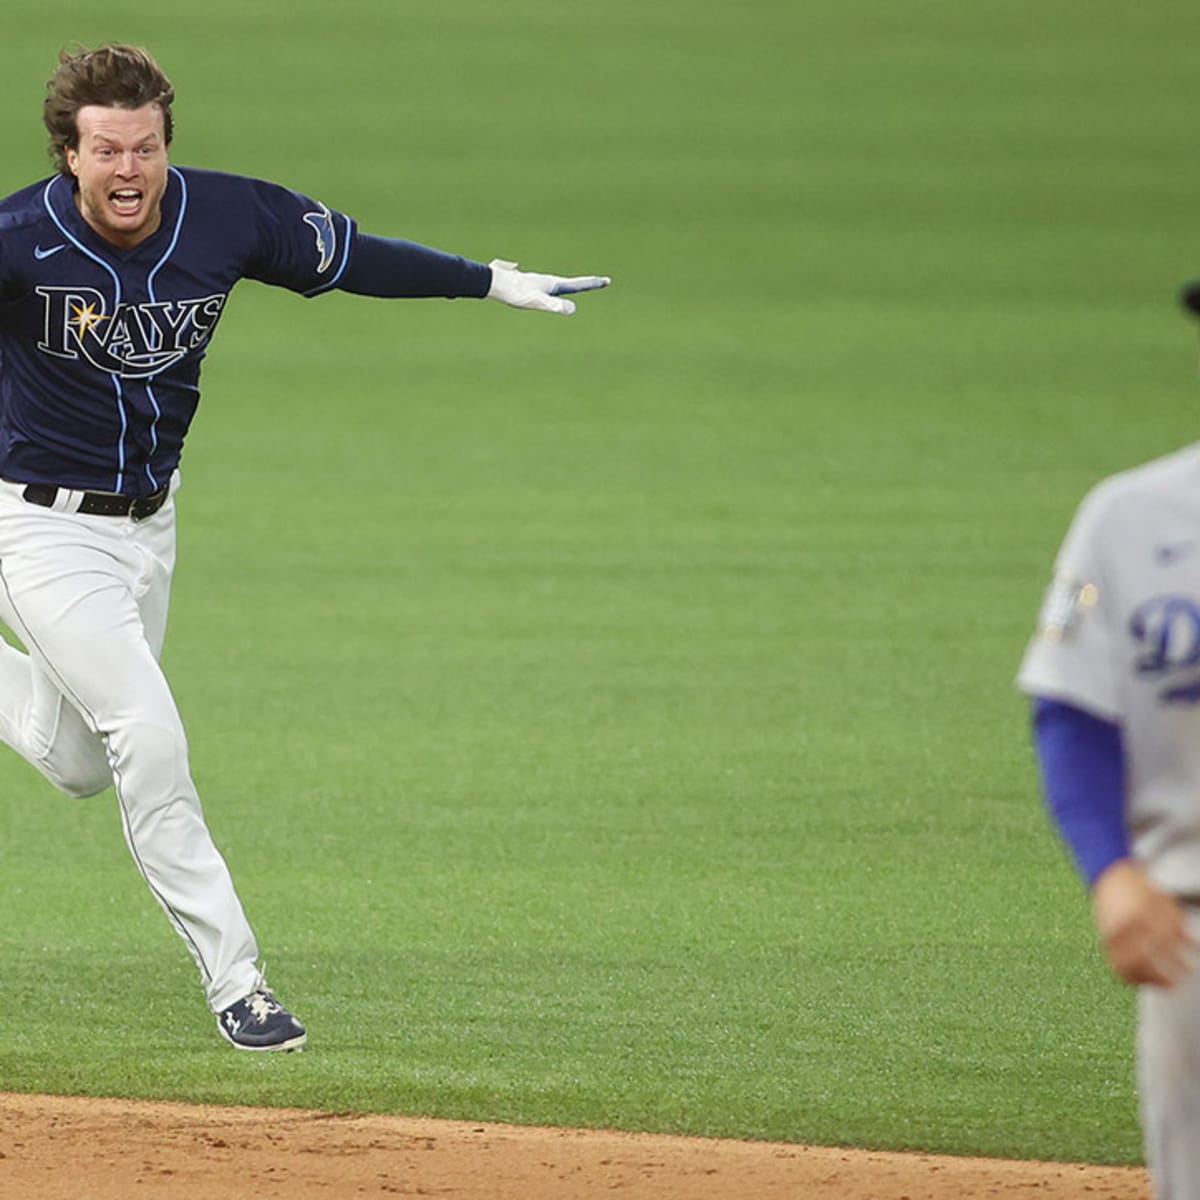 World Series: Brett Phillips rescues Rays with perfect moment